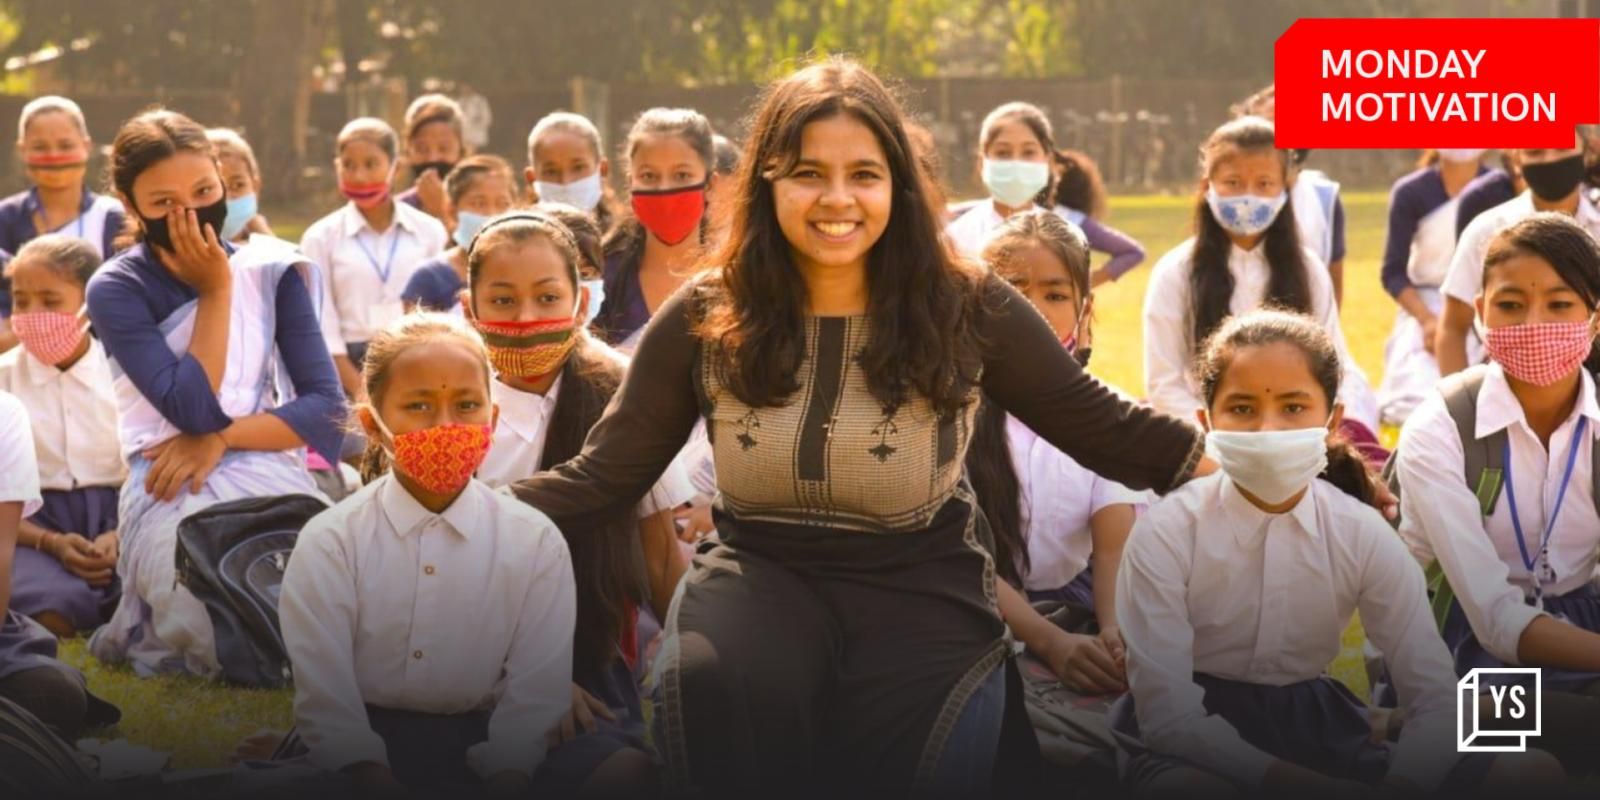 Meet the 20-year-old social activist trying to create a gender equal world